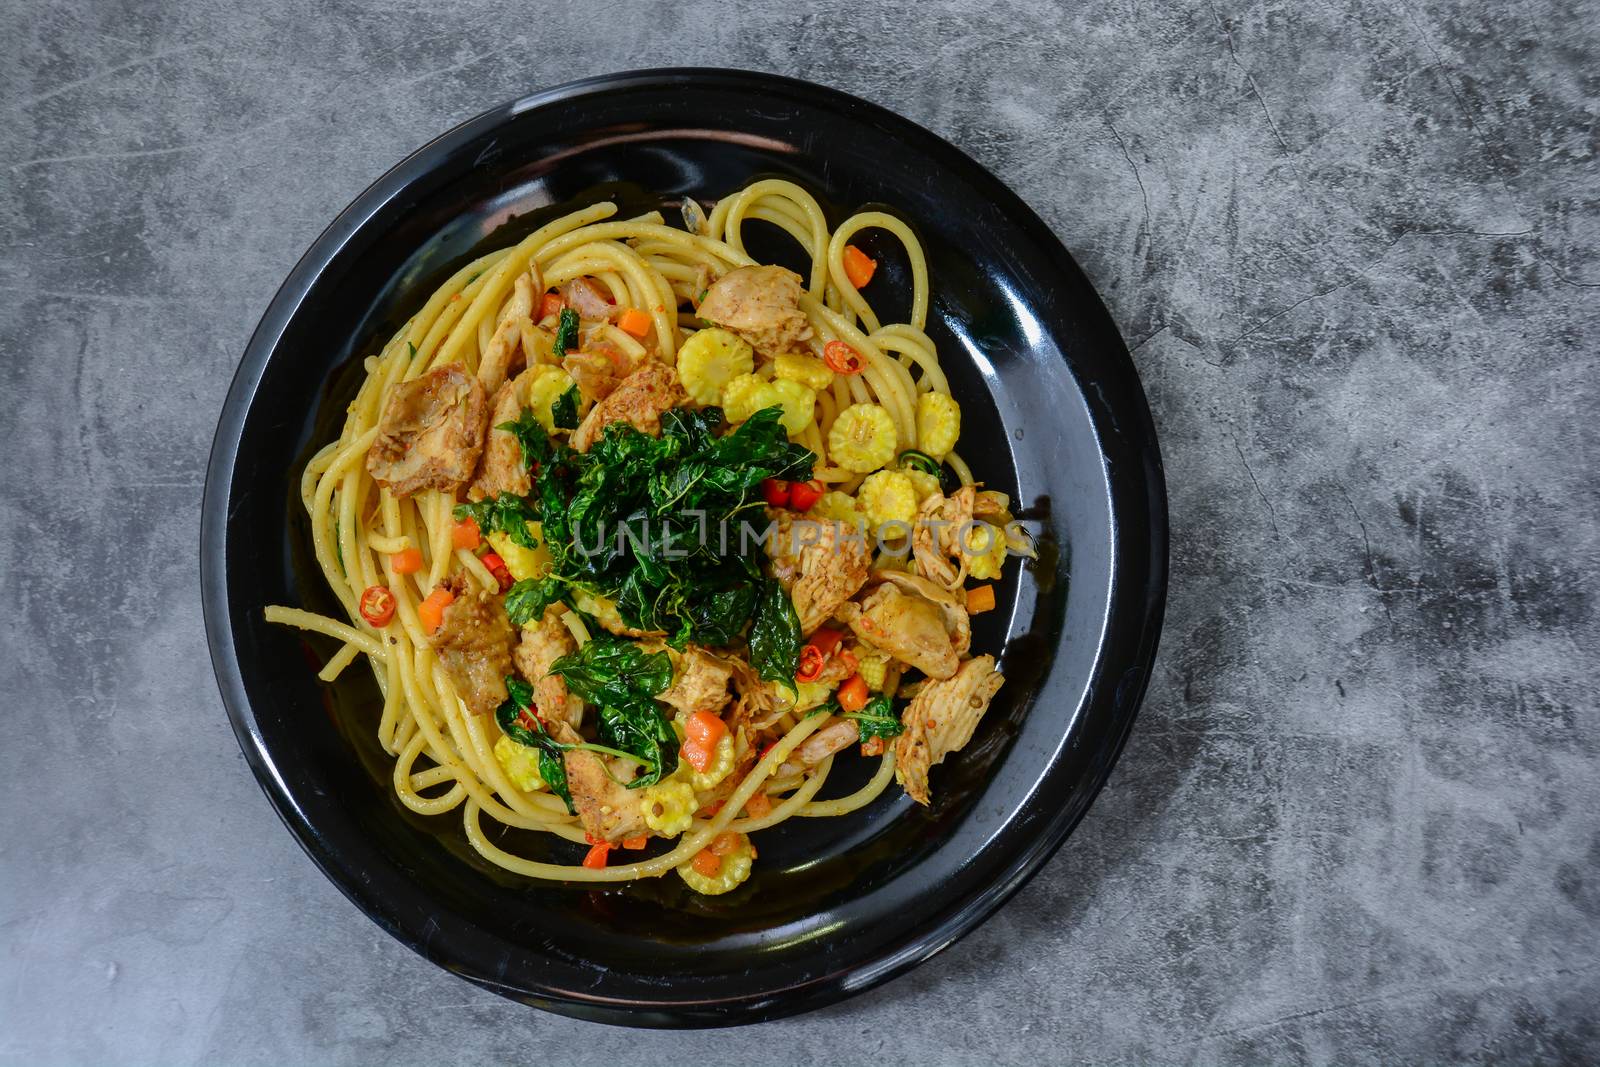 Hot and spicy chicken spaghetti, topping with crispy sweet basil by yuiyuize